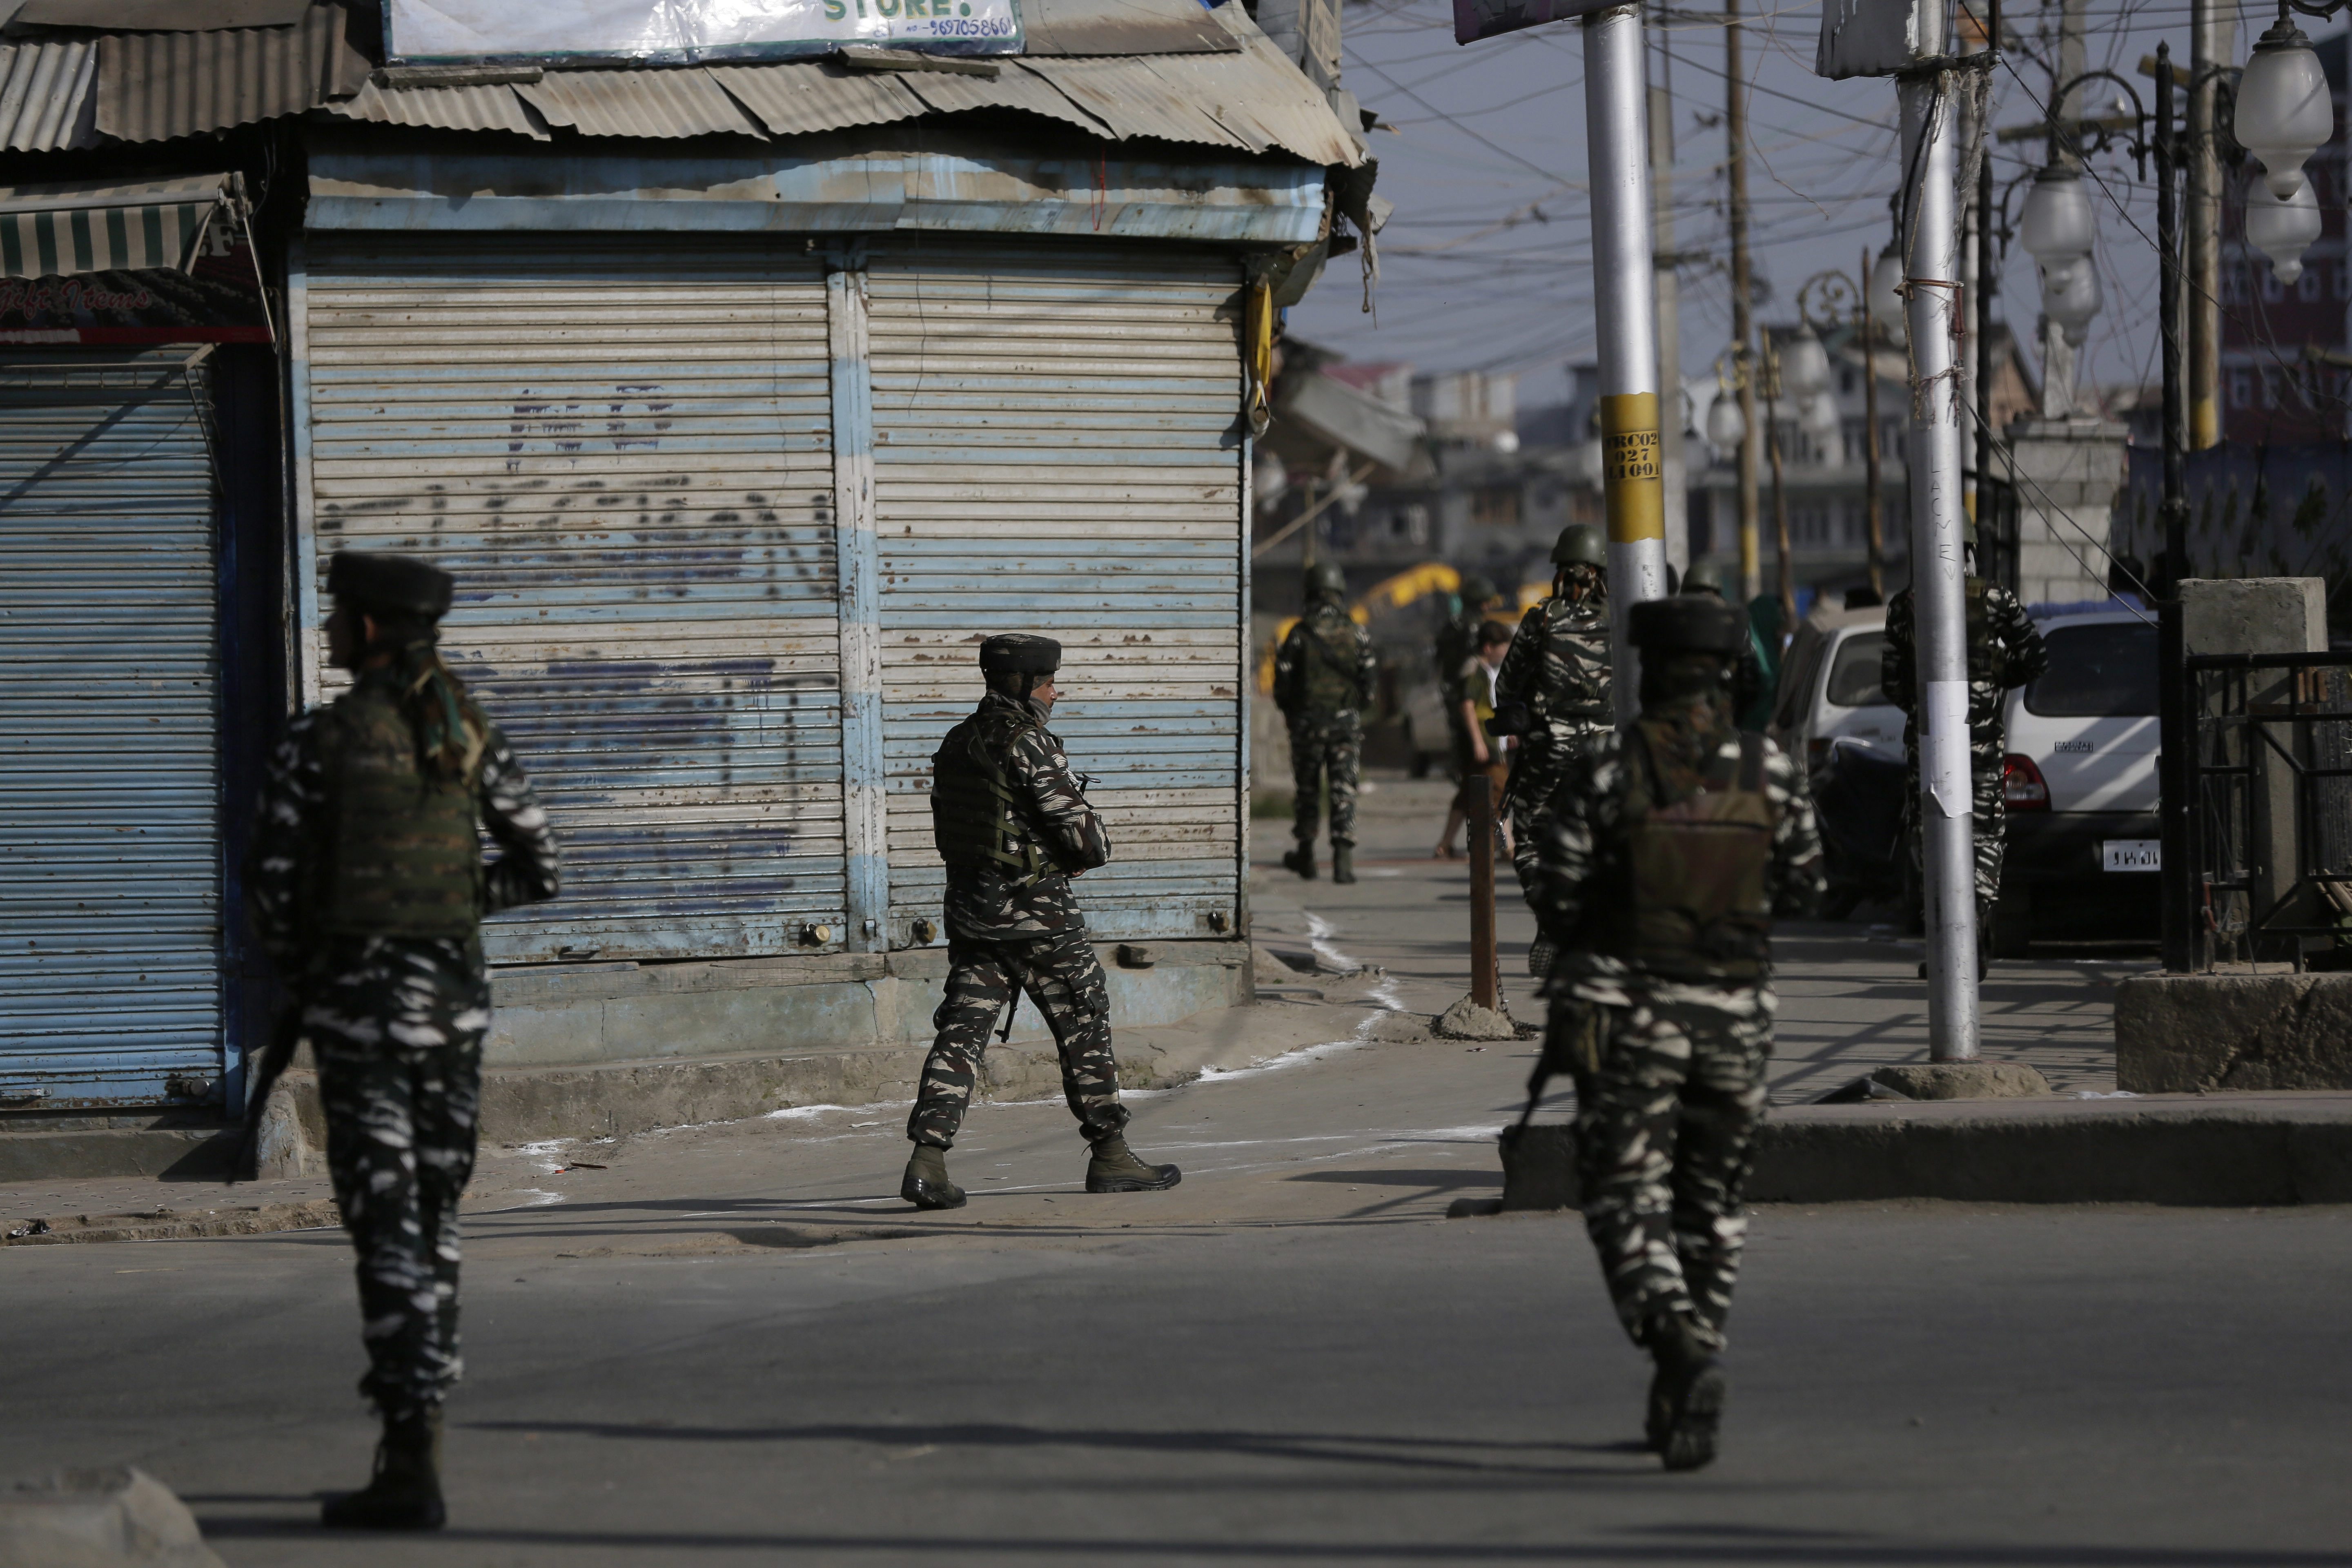 In Kashmir's hate-and-violence narrative, a silver lining of goodwill and amity